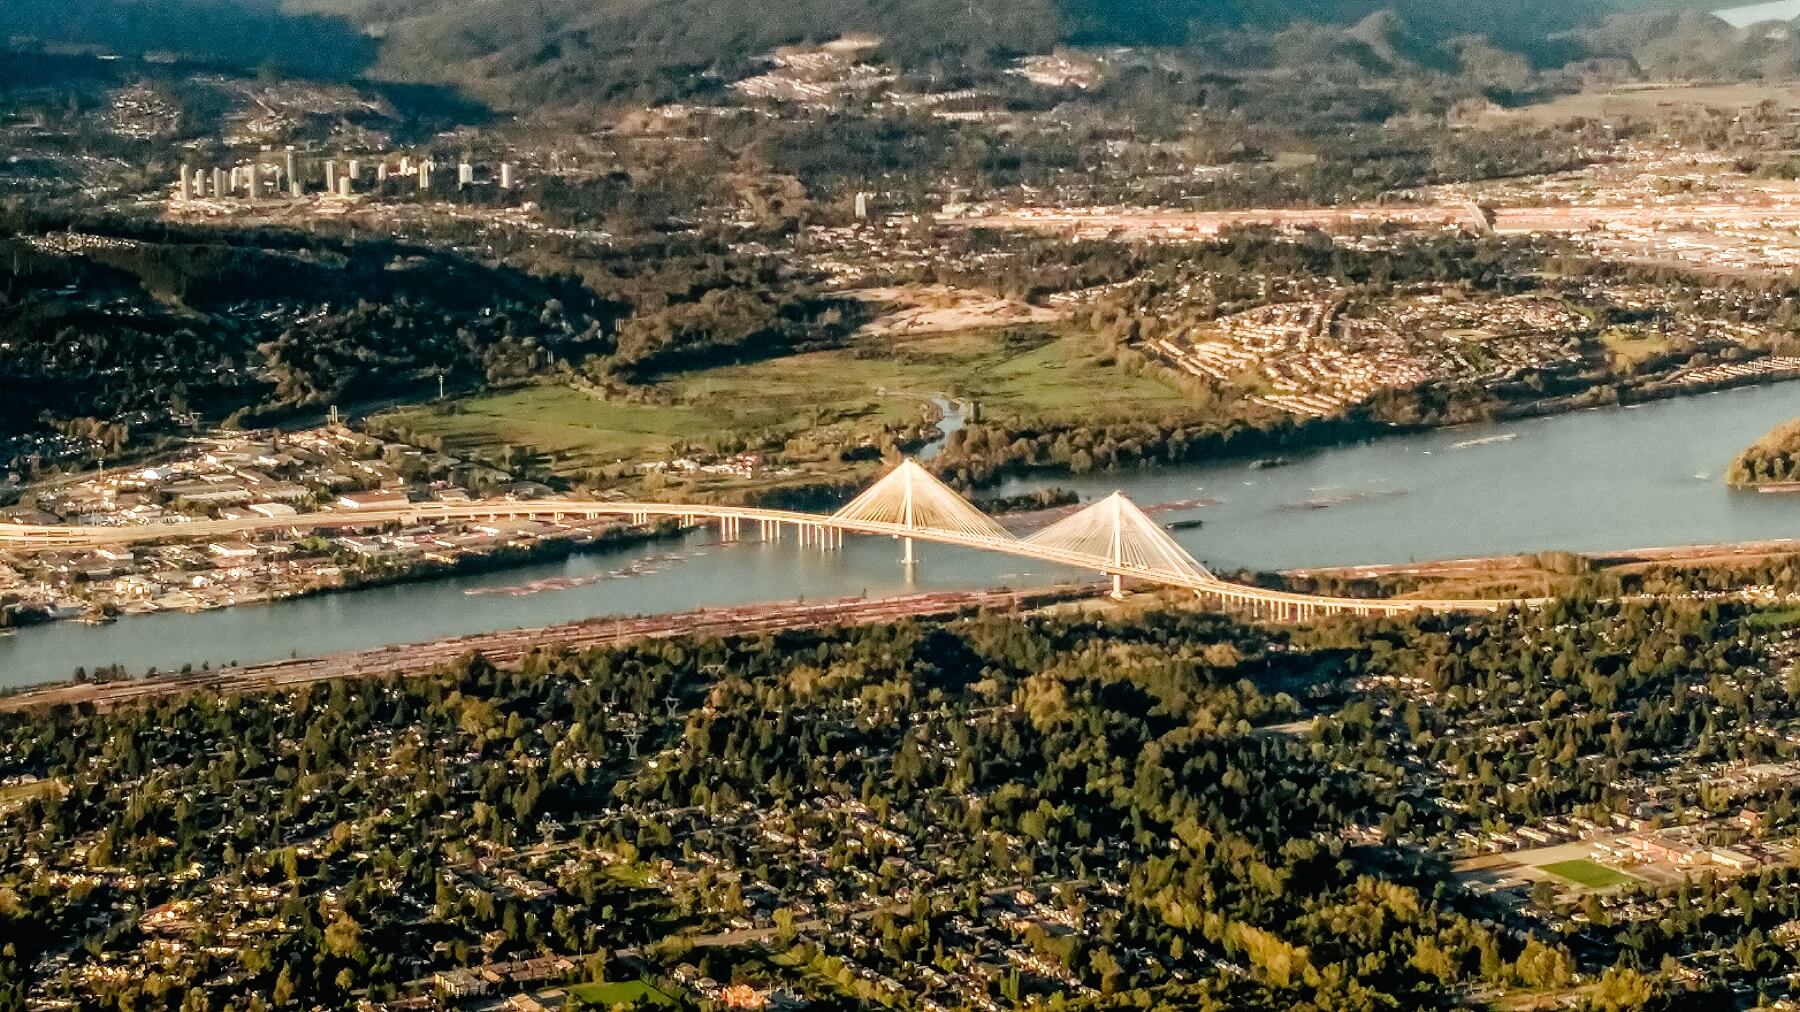 A view of Vancouver from the airplane